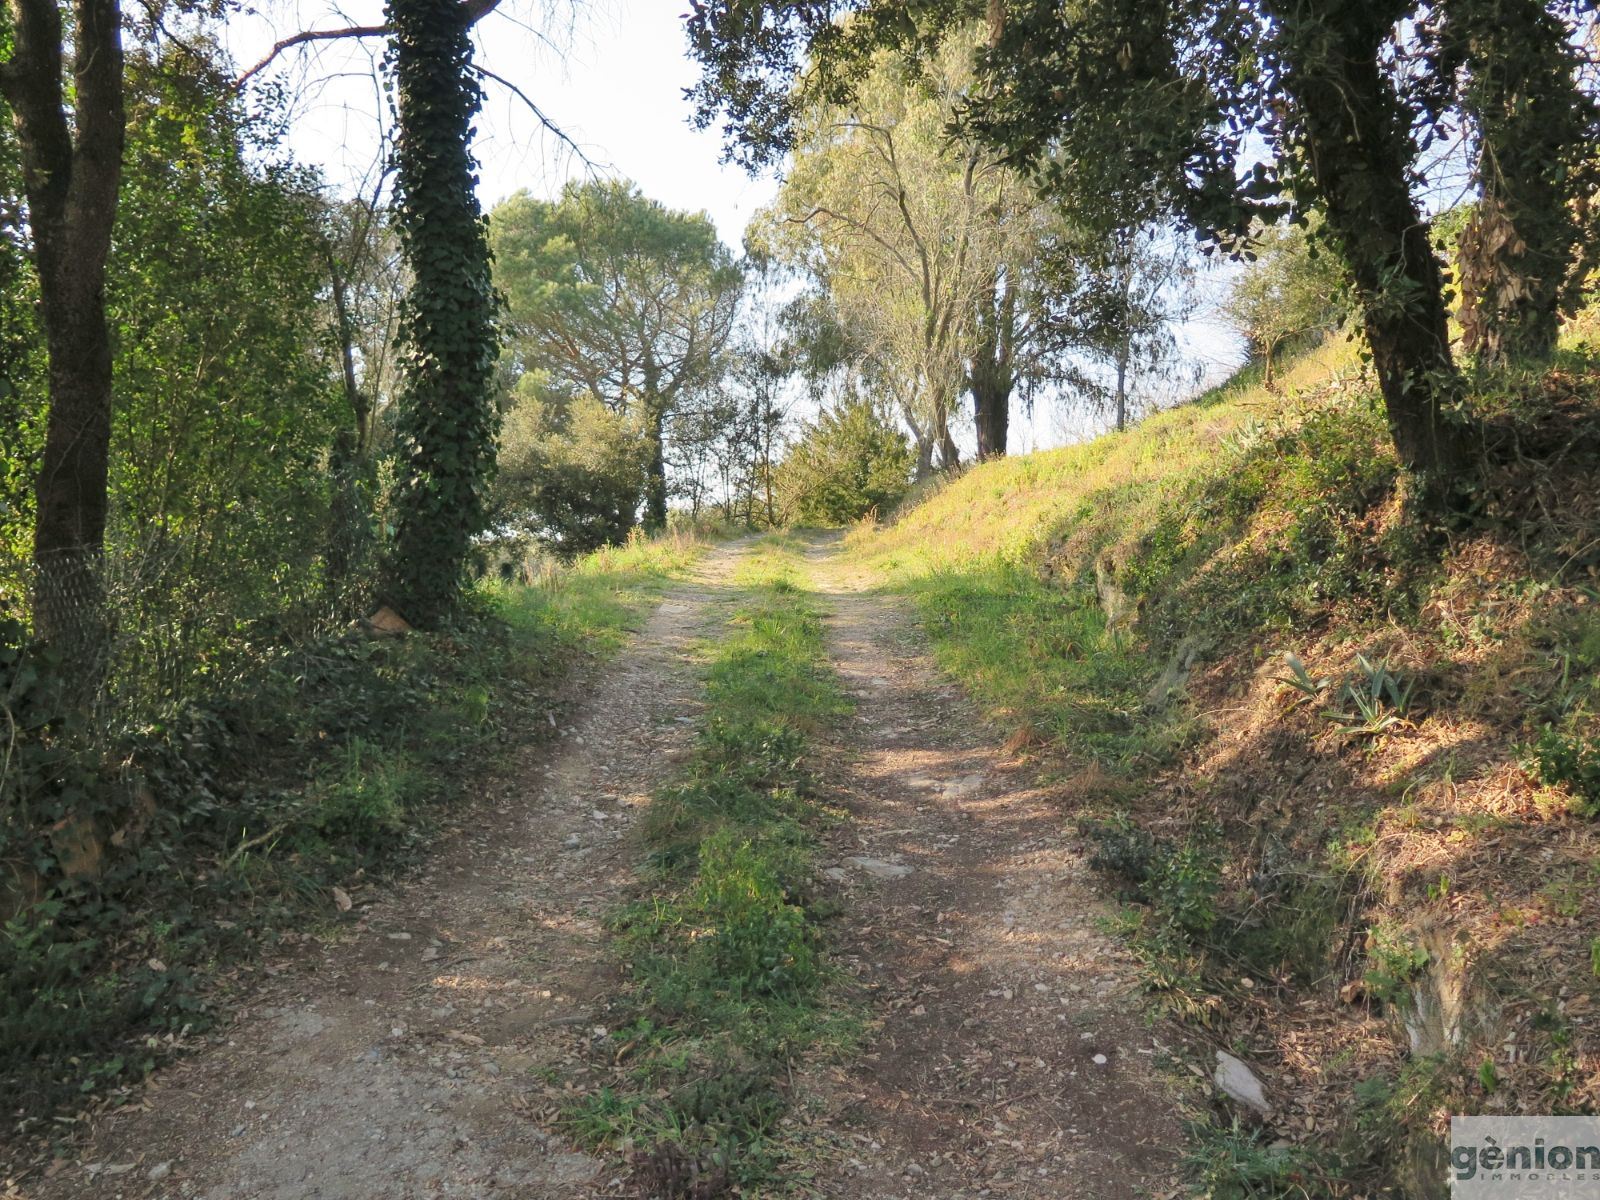 FARMHOUSE IN QUART, NEXT TO GIRONA. LIVING AREA OF 265 M² ON A 7,000 M² PLOT